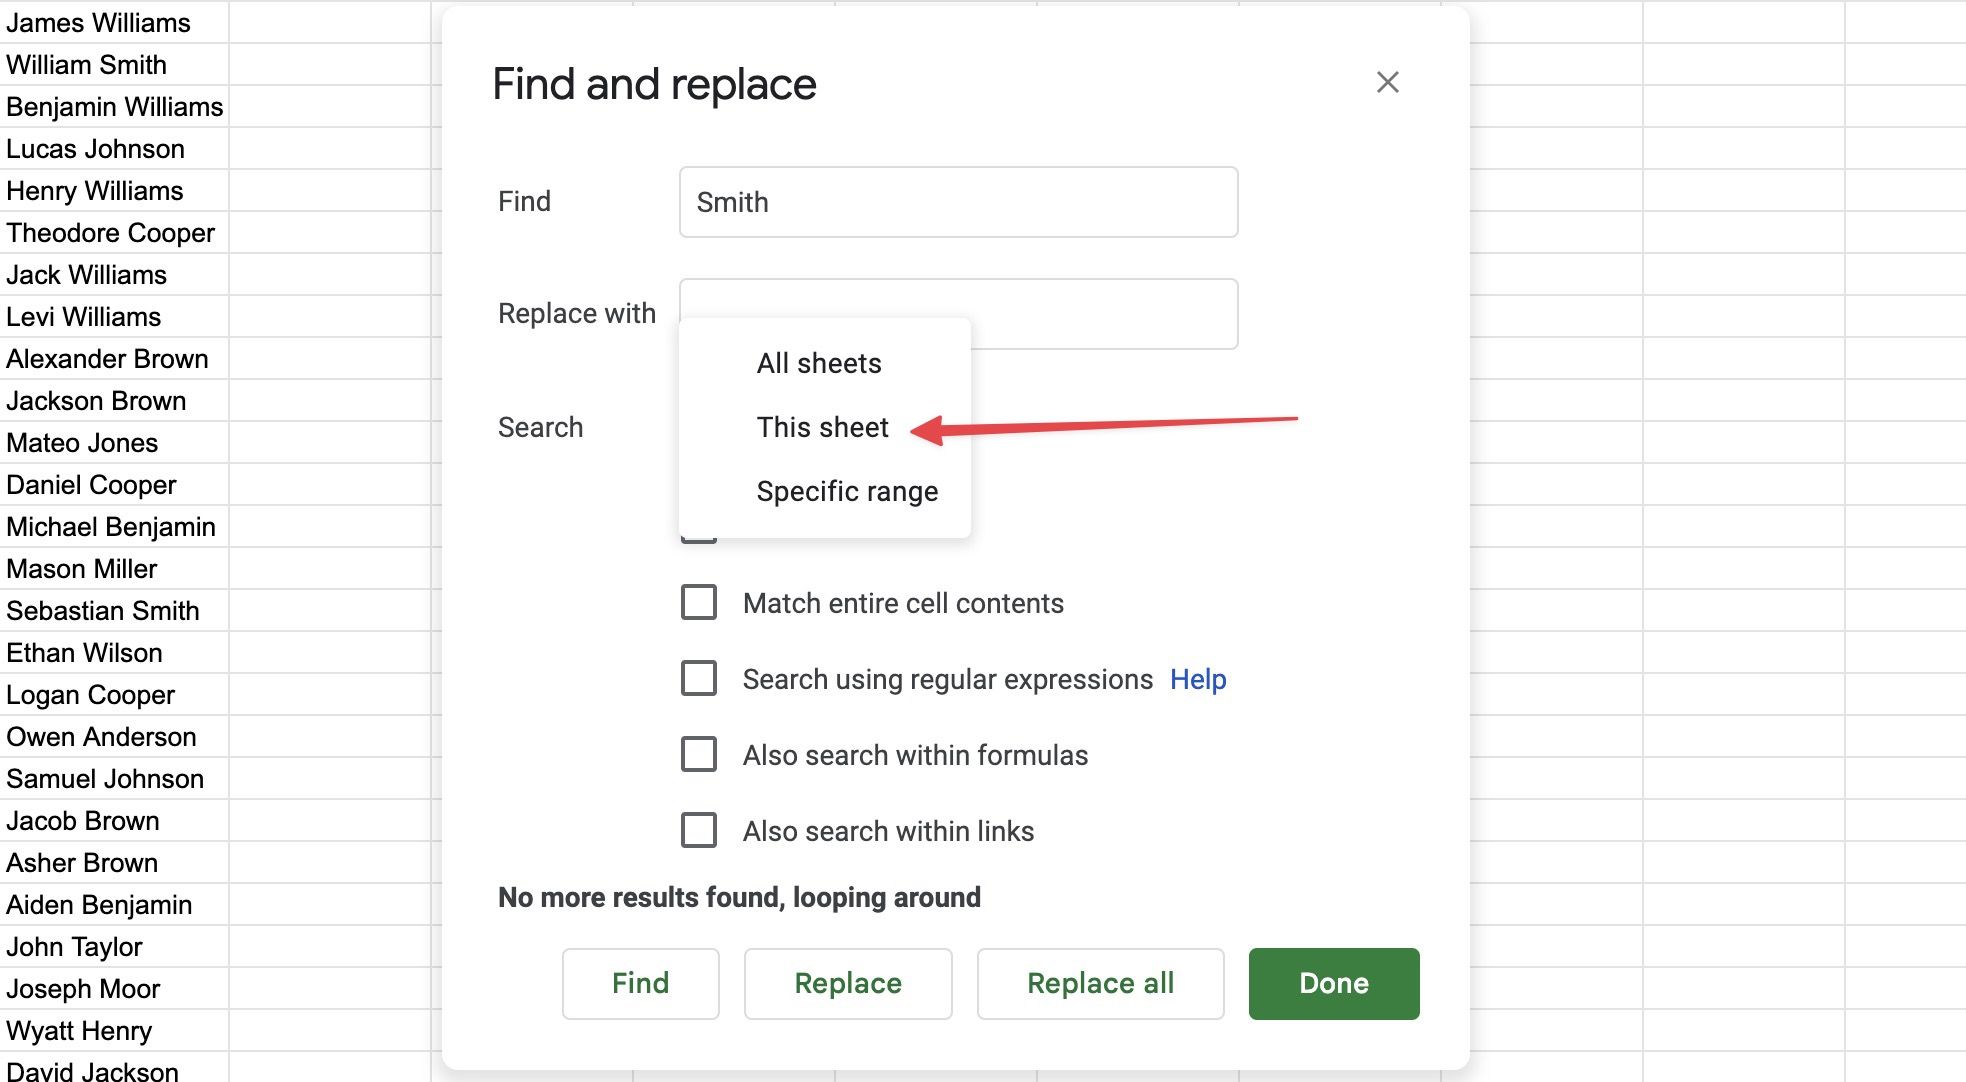 Restricting the search to current sheet in Find and Replace